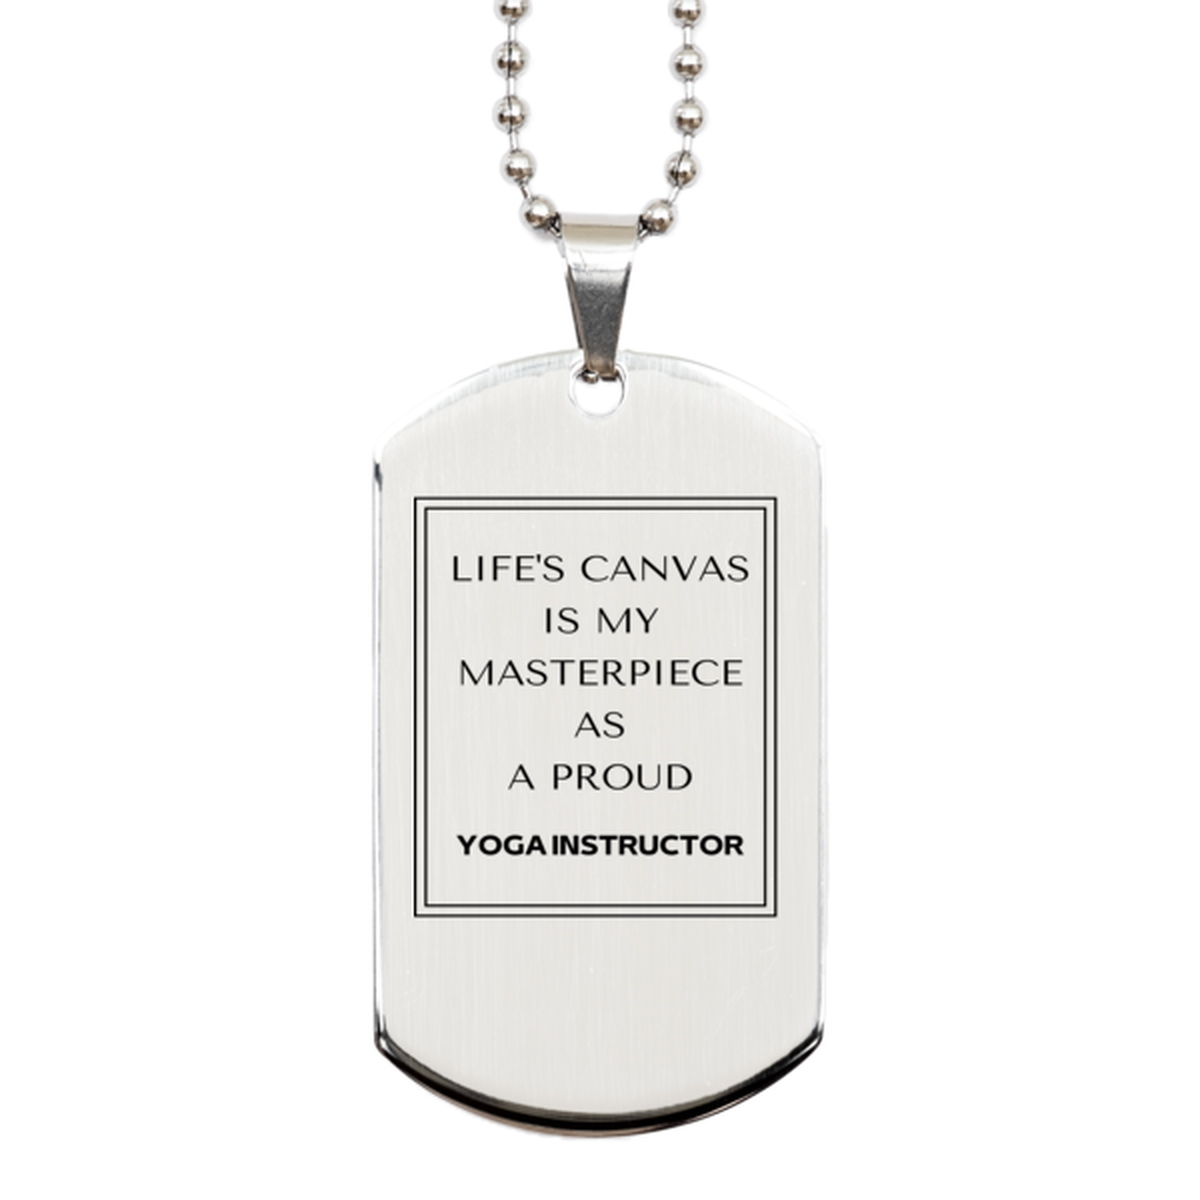 Proud Yoga Instructor Gifts, Life's canvas is my masterpiece, Epic Birthday Christmas Unique Silver Dog Tag For Yoga Instructor, Coworkers, Men, Women, Friends